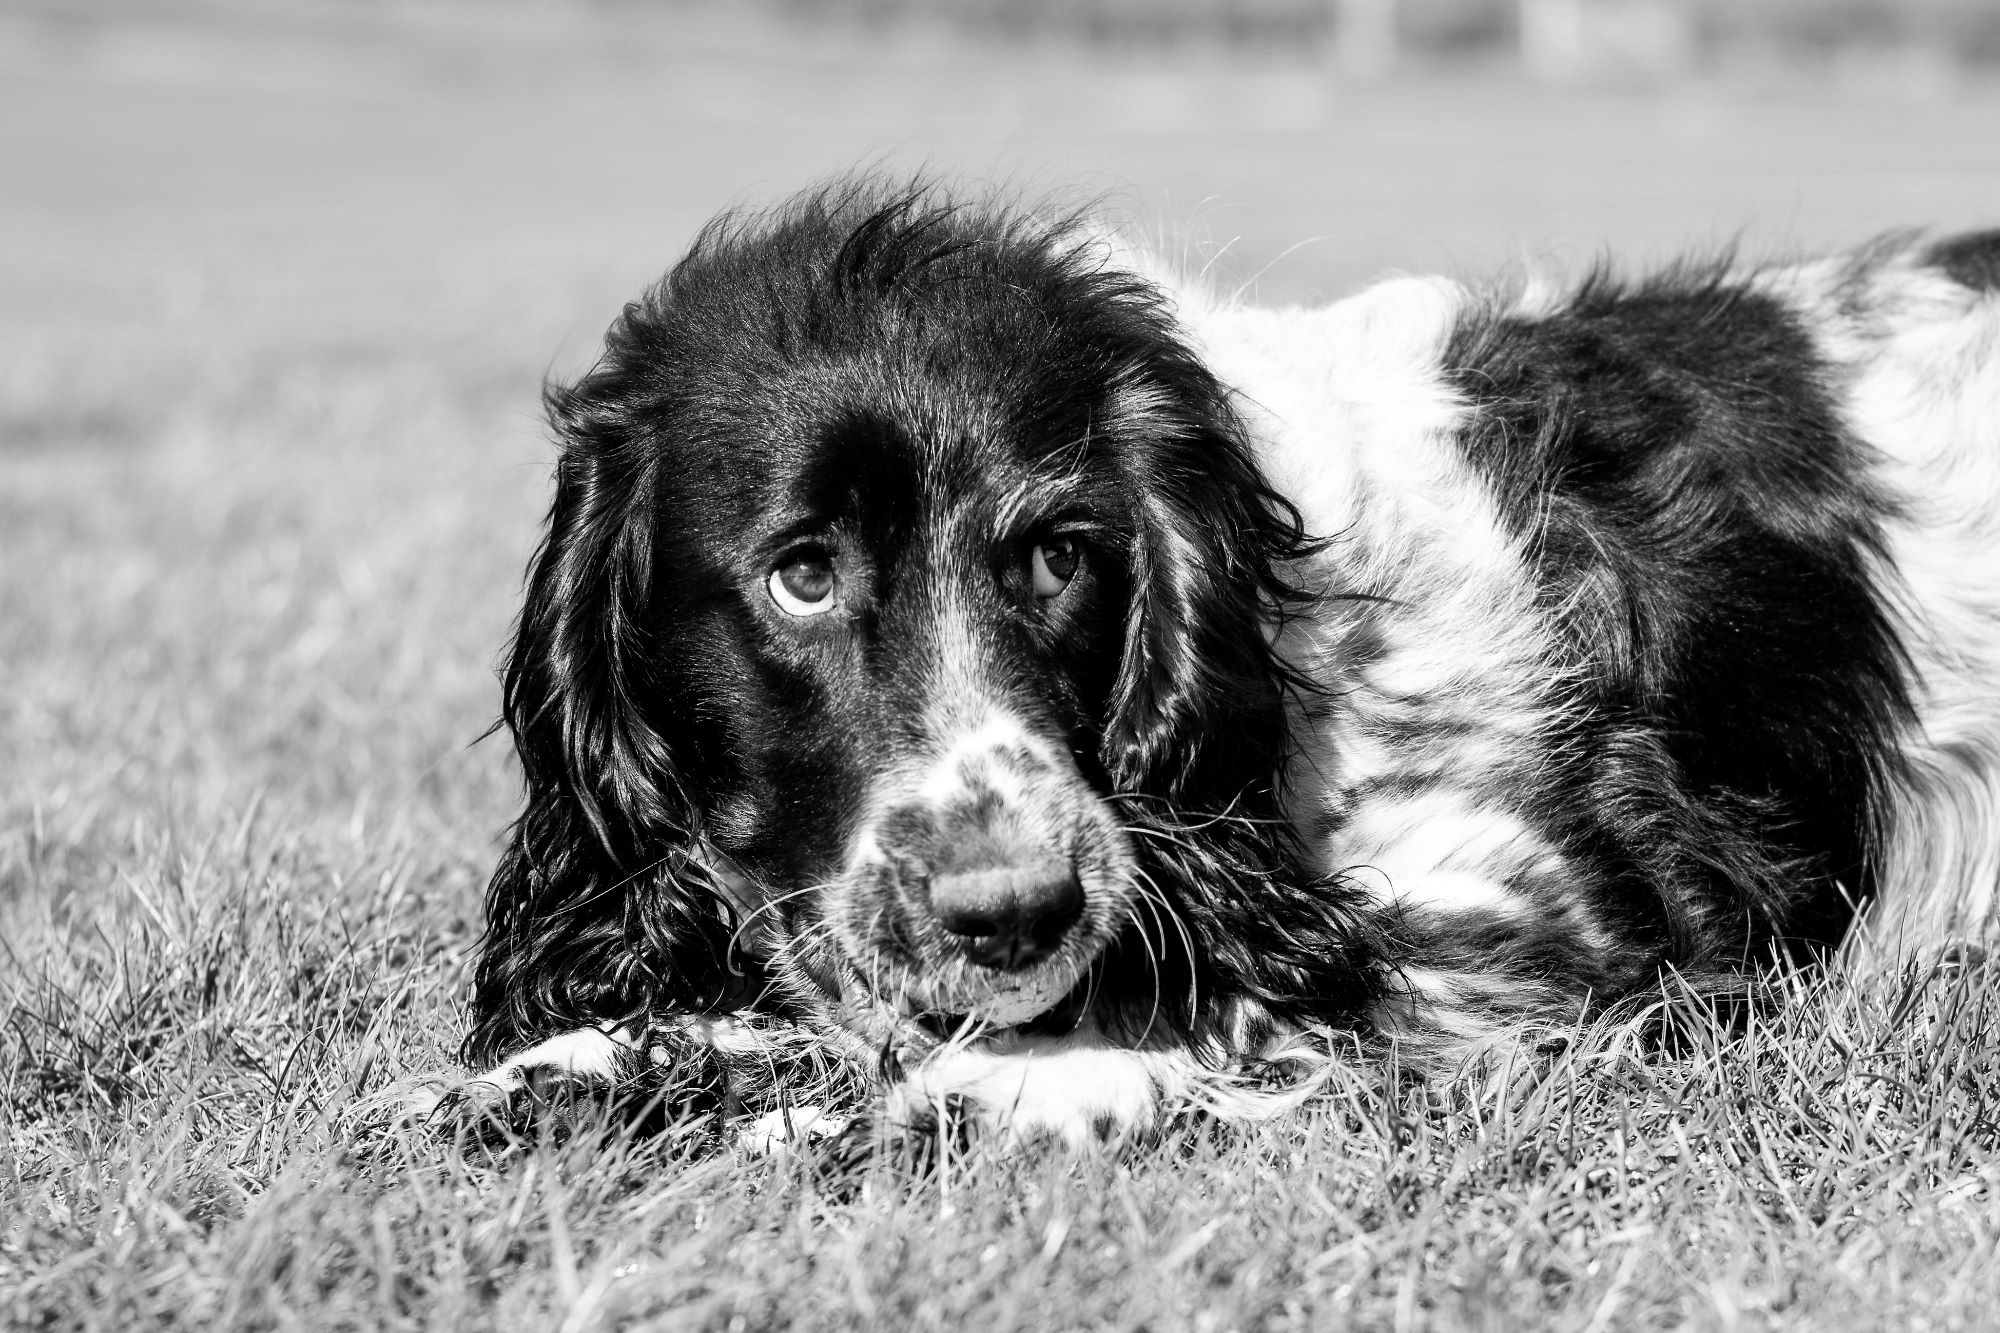 Black and White photograph featuring a spaniel chewing a tennis ball